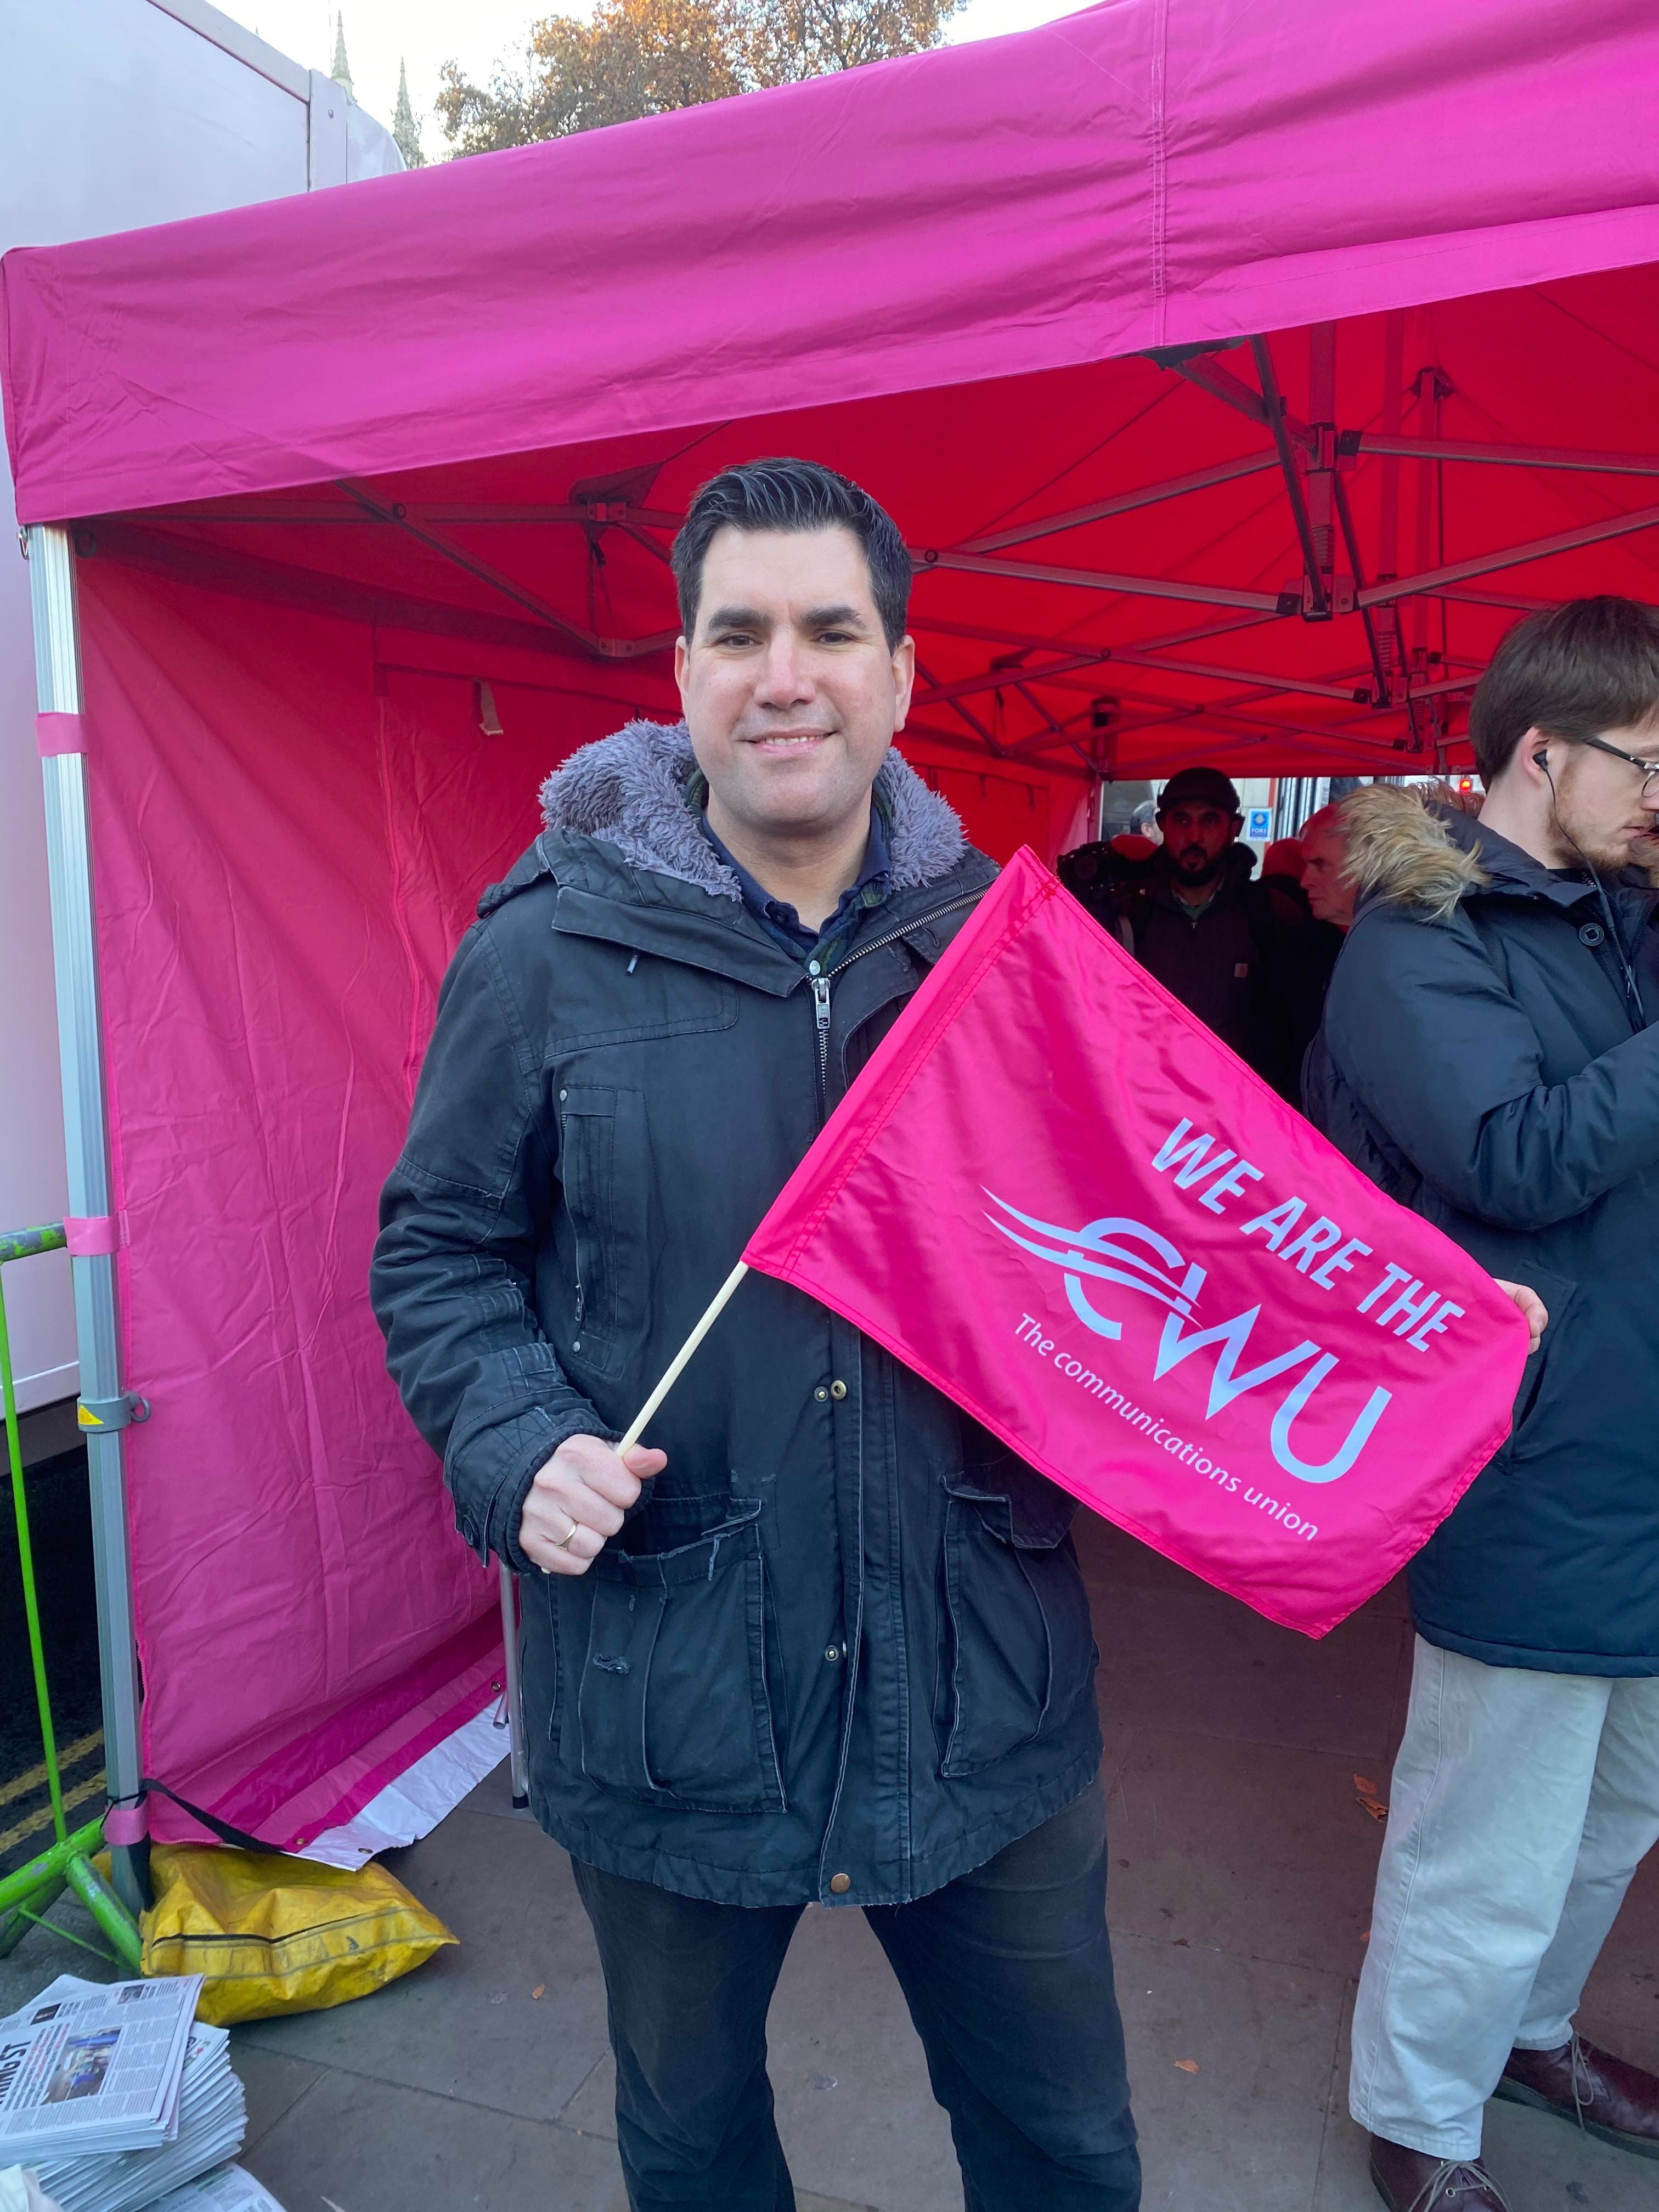 Richard Burgon MP supports striking postal workers at Parliament Square rally.